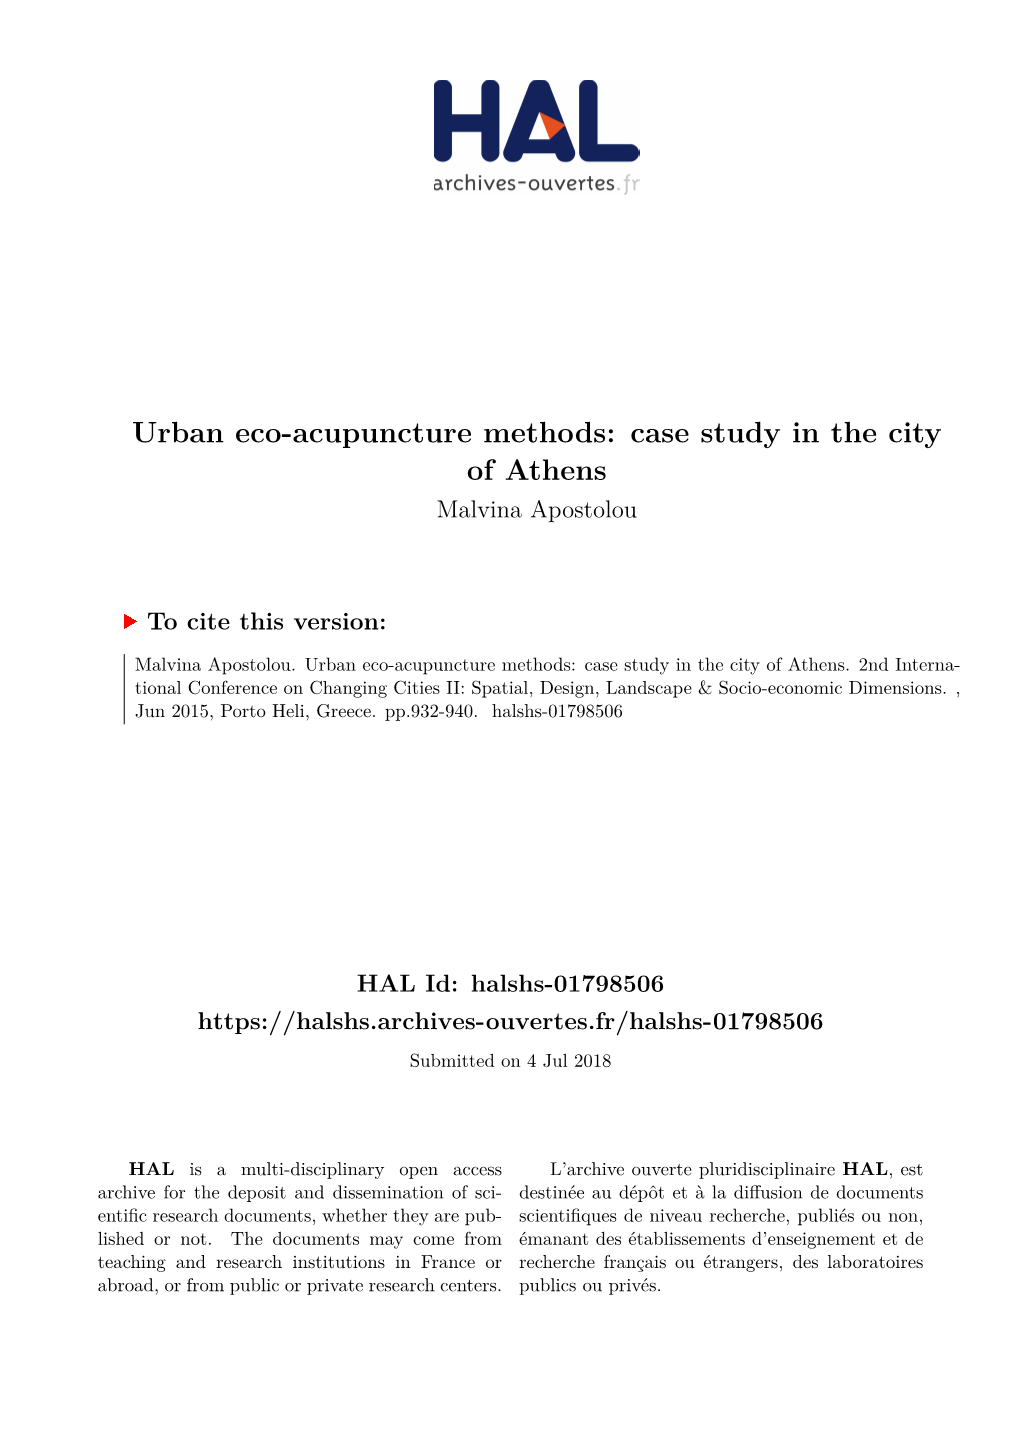 Urban Eco-Acupuncture Methods: Case Study in the City of Athens Malvina Apostolou